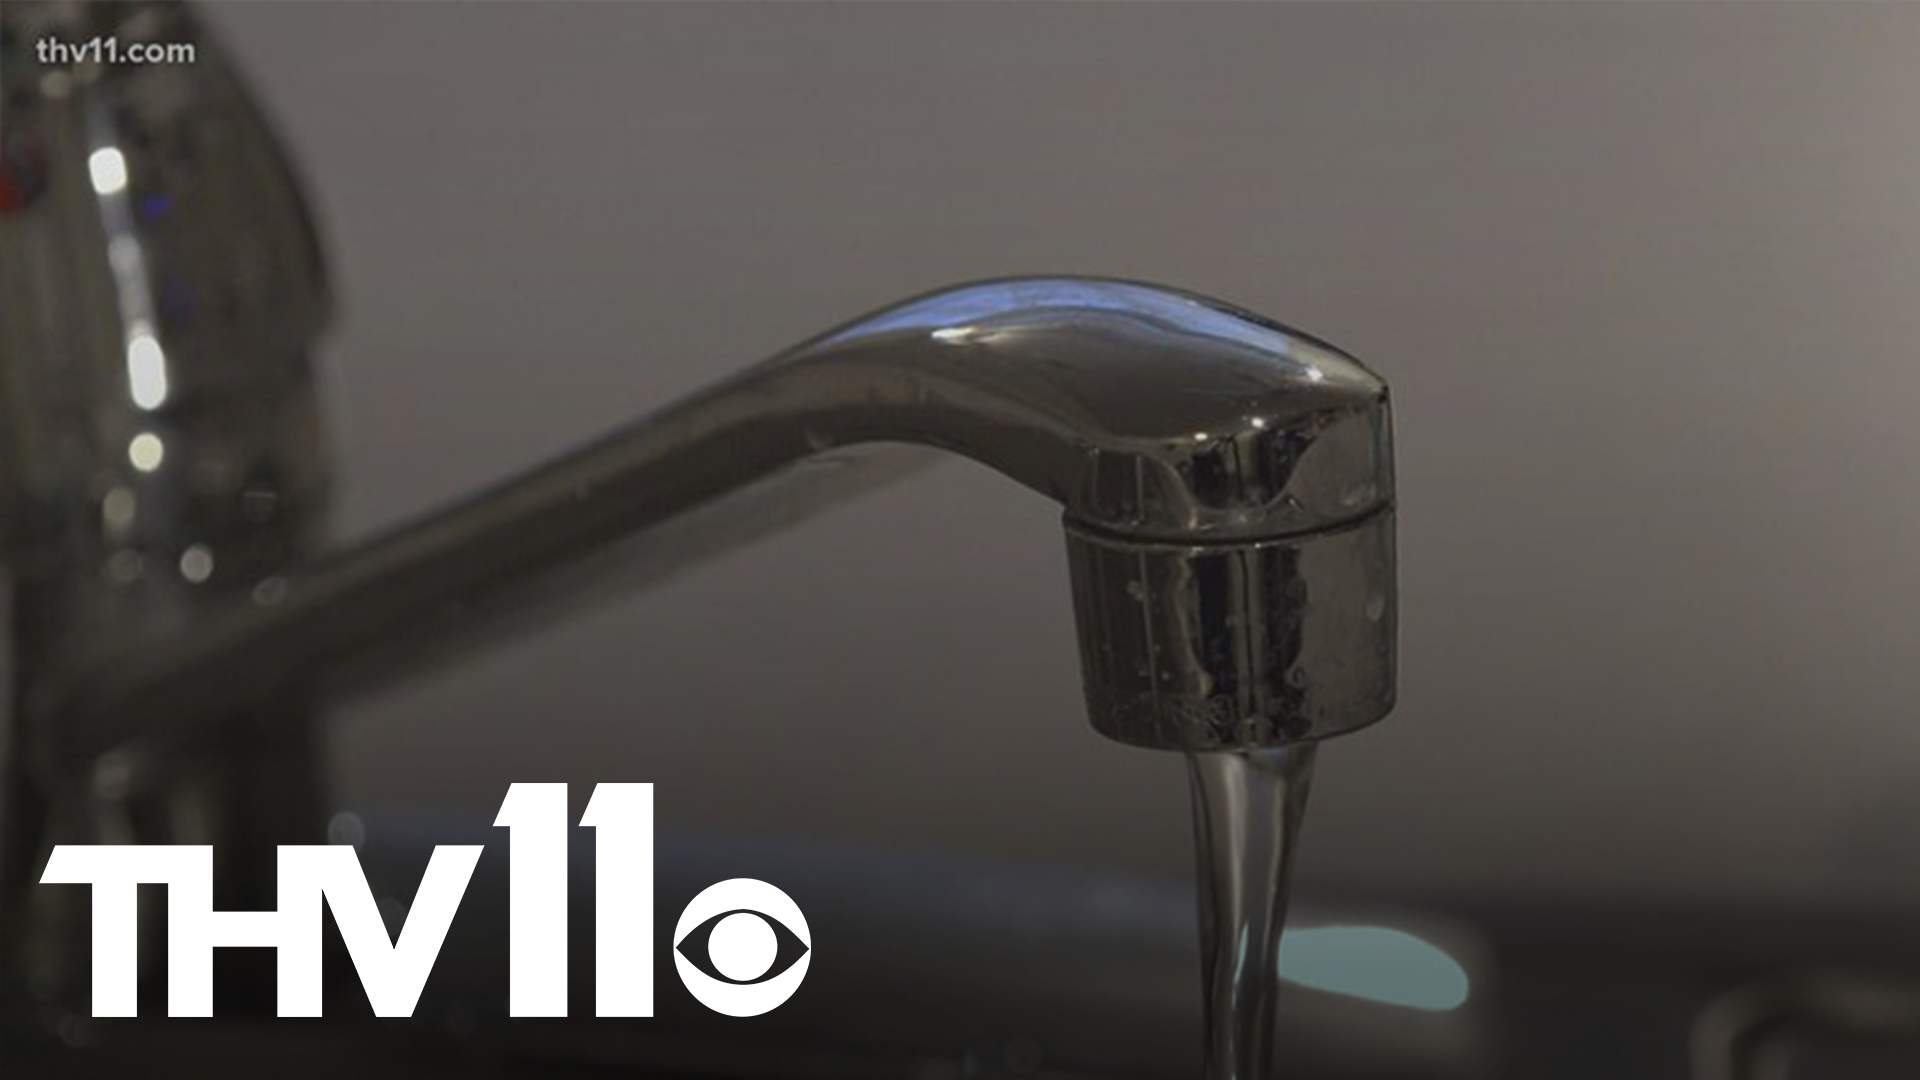 Companies are asking customers to conserve water as a measure to protect the system as the ground begins to warm and pipes begin to thaw.